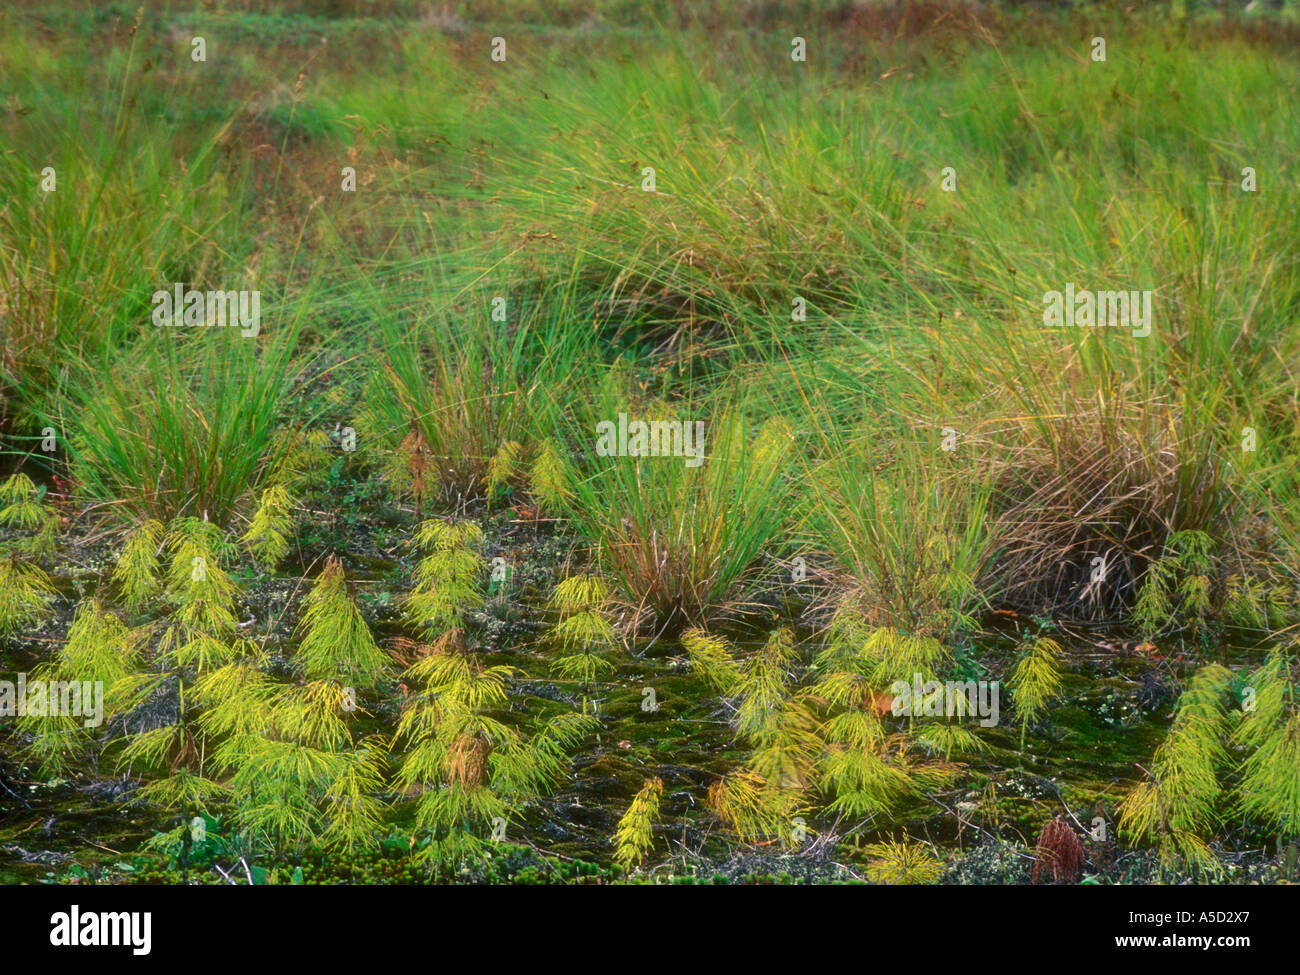 Meadow horsetail (Equisetum pratense) and sedges in wet meadow in late summer, Greater Sudbury, Ontario, Canada Stock Photo